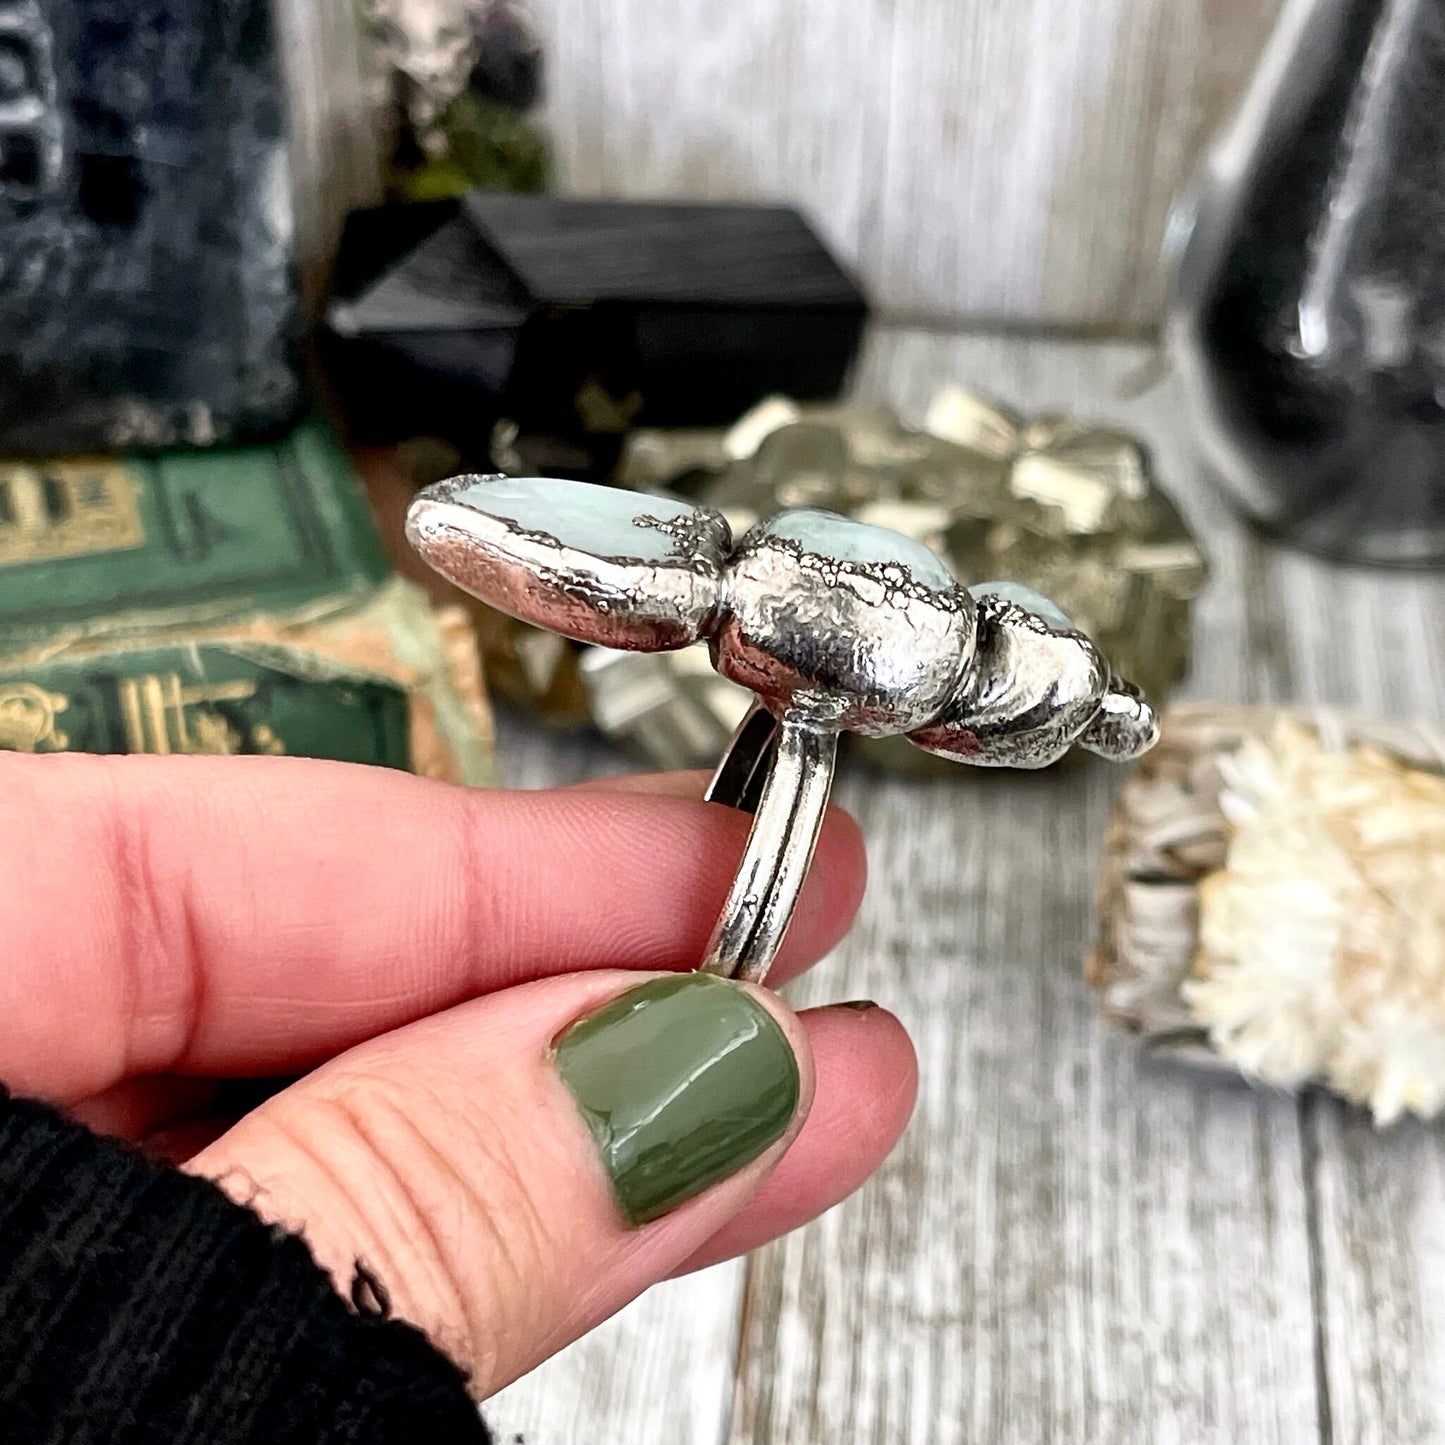 Size 9.5 Crystal Ring - Four Stone Aquamarine Raw Herkimer Diamond Quartz Ring In Silver / Foxlark - One of a Kind / Blue Crystal Jewelry